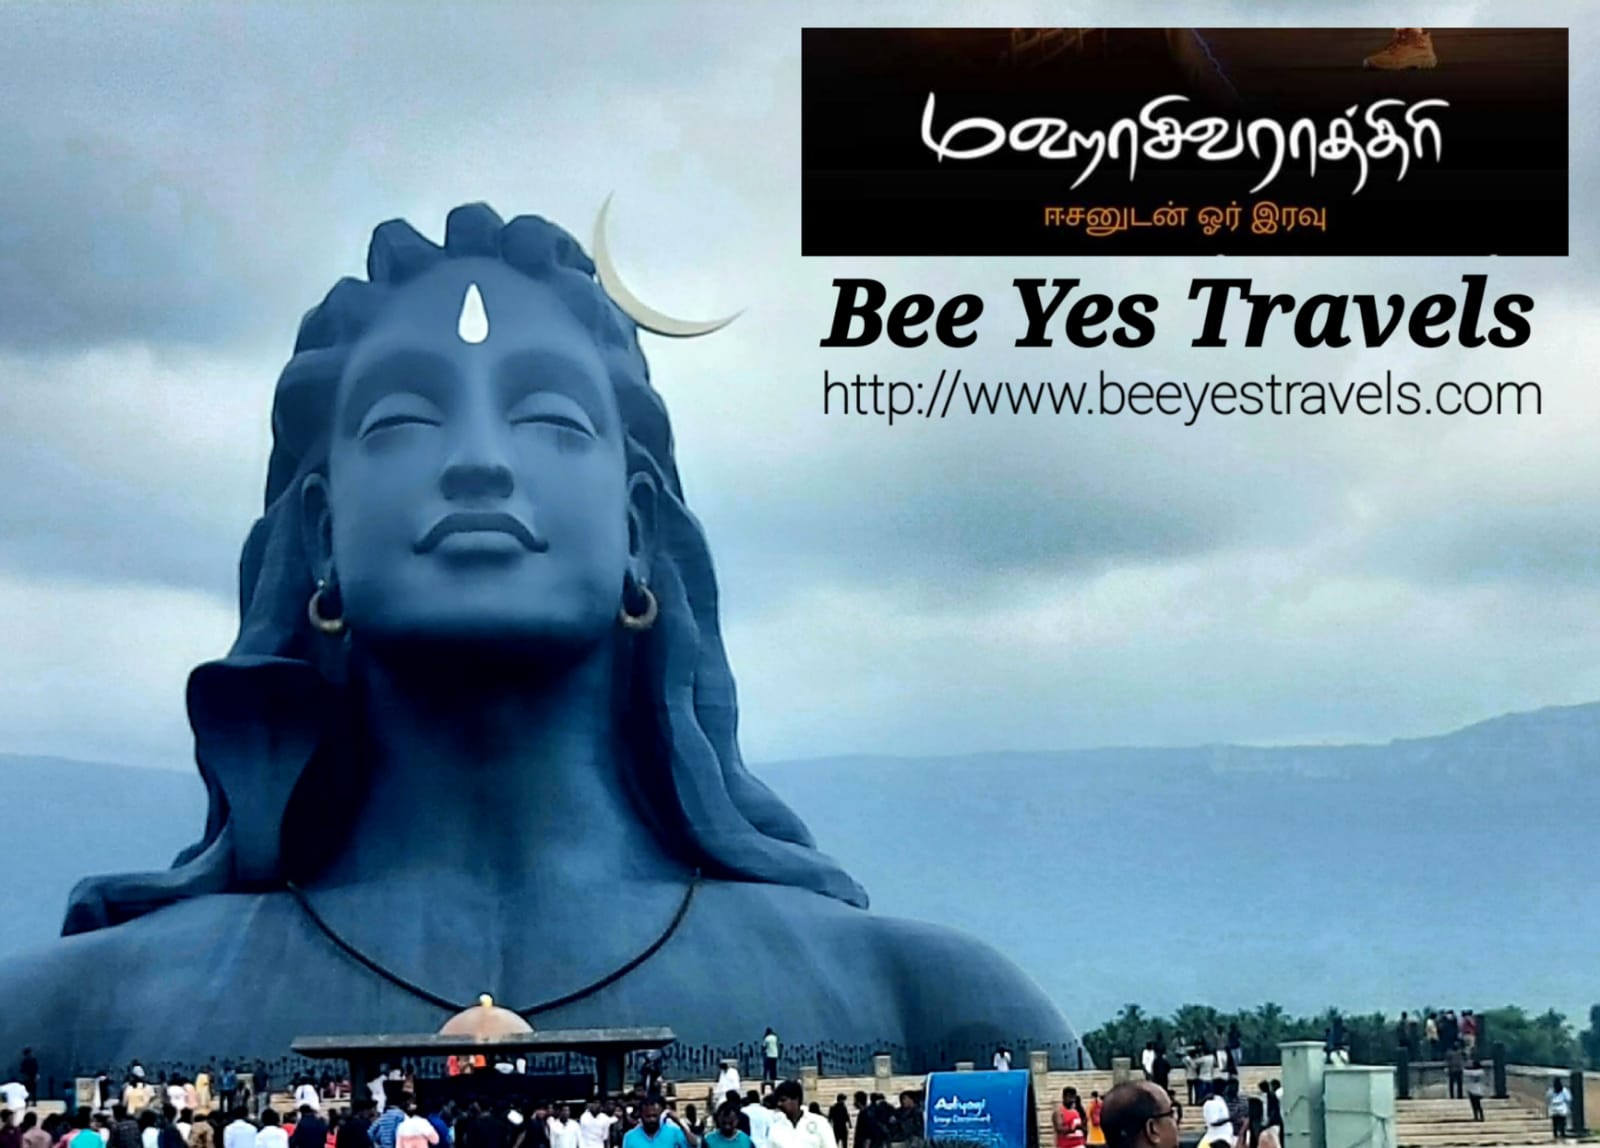 Image - Bee yes travels